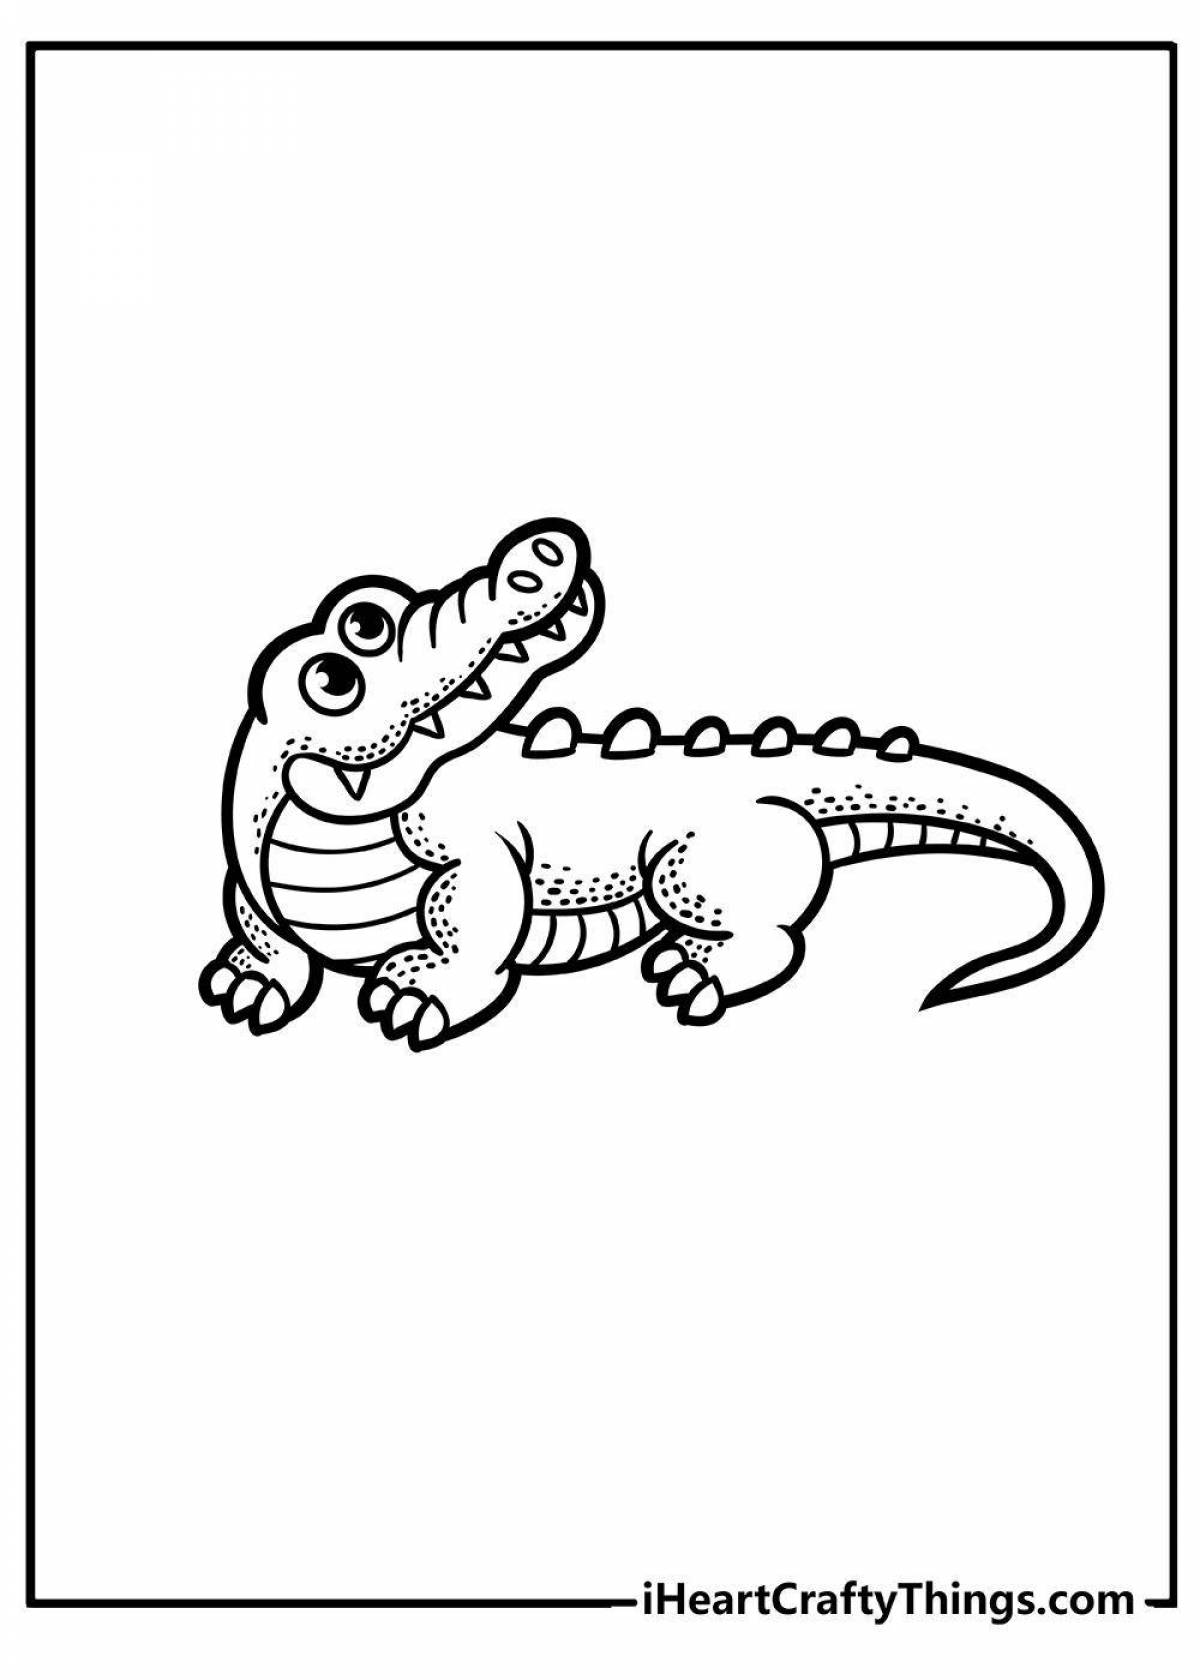 Fun coloring crocodile for children 3-4 years old